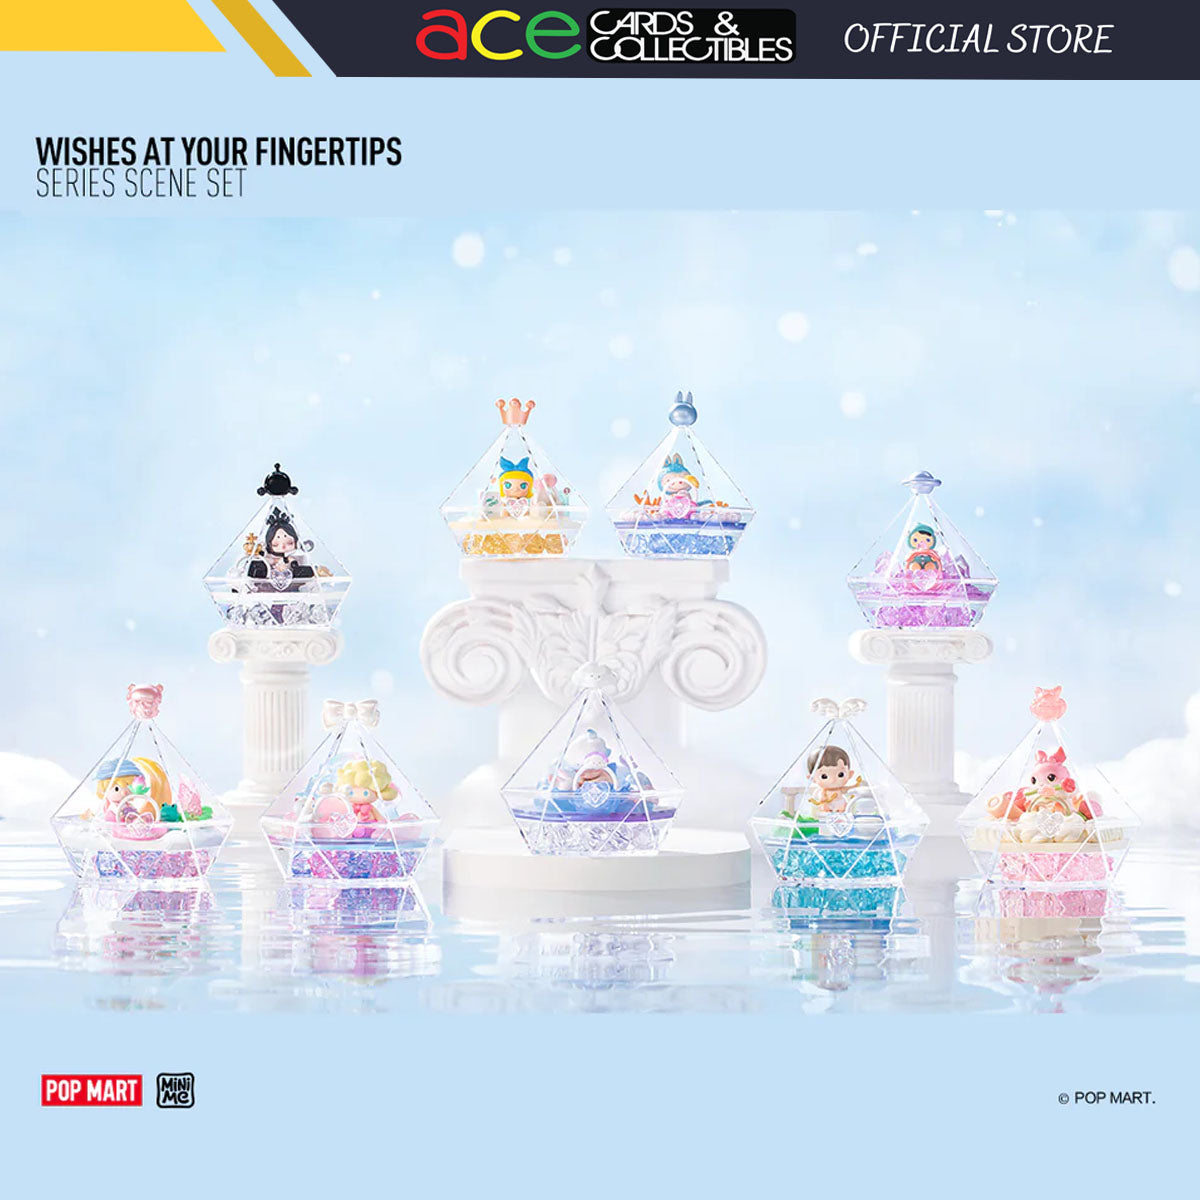 Pop Mart Wishes at Your Fingertips Series Scene Set-Single Box (Random)-Pop Mart-Ace Cards & Collectibles